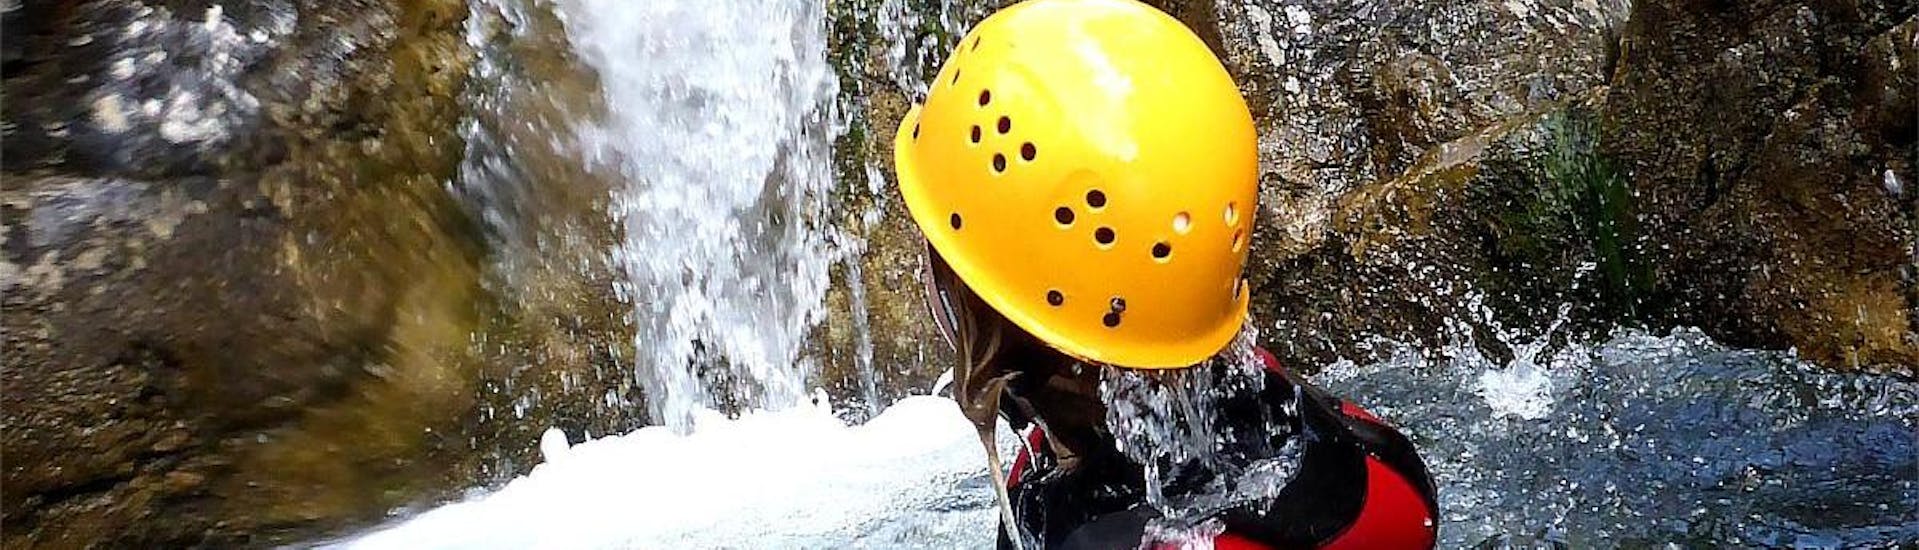 A costumer in the water next to a waterfall during the Advanced Canyoning in Allgäu - Day Tour with Die Canyonauten Allgäu